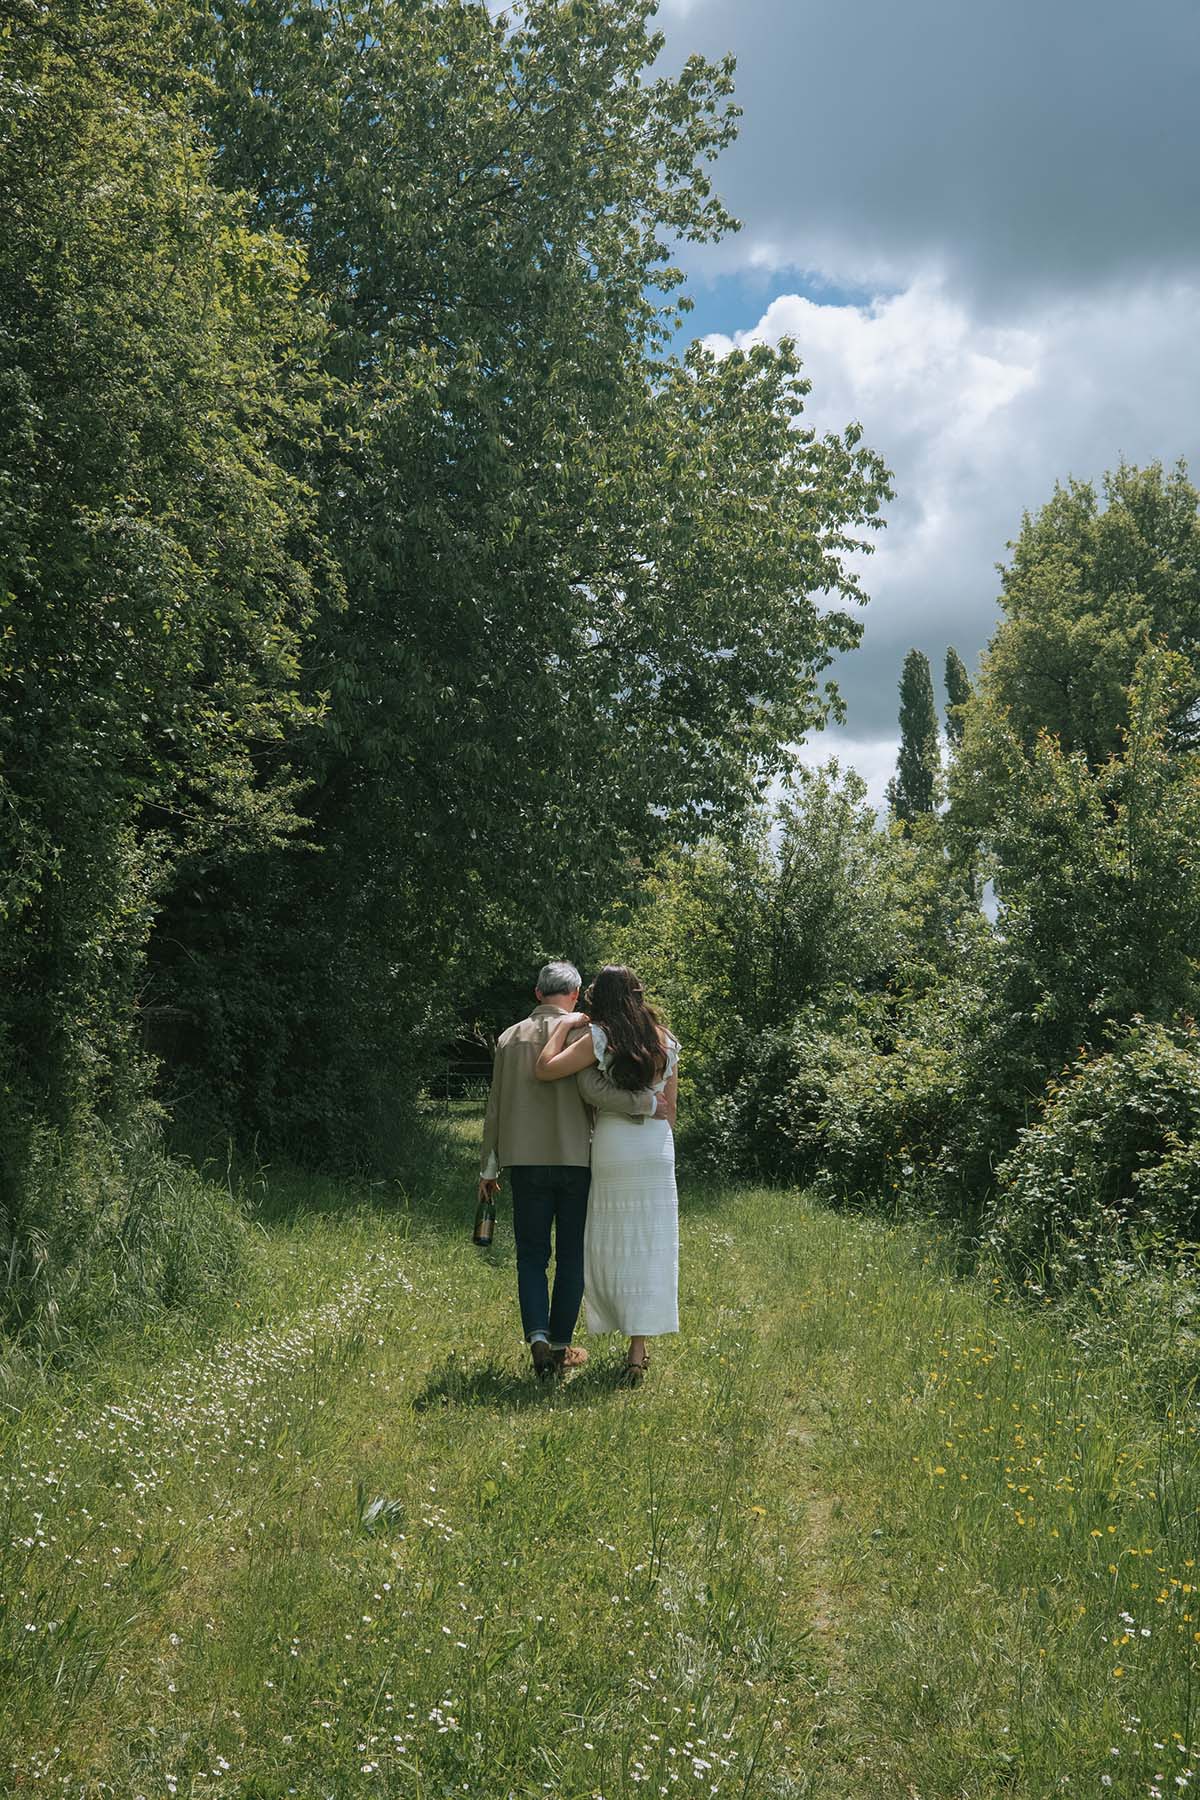 A couple embraces while walking away from the camera along an overgrown track